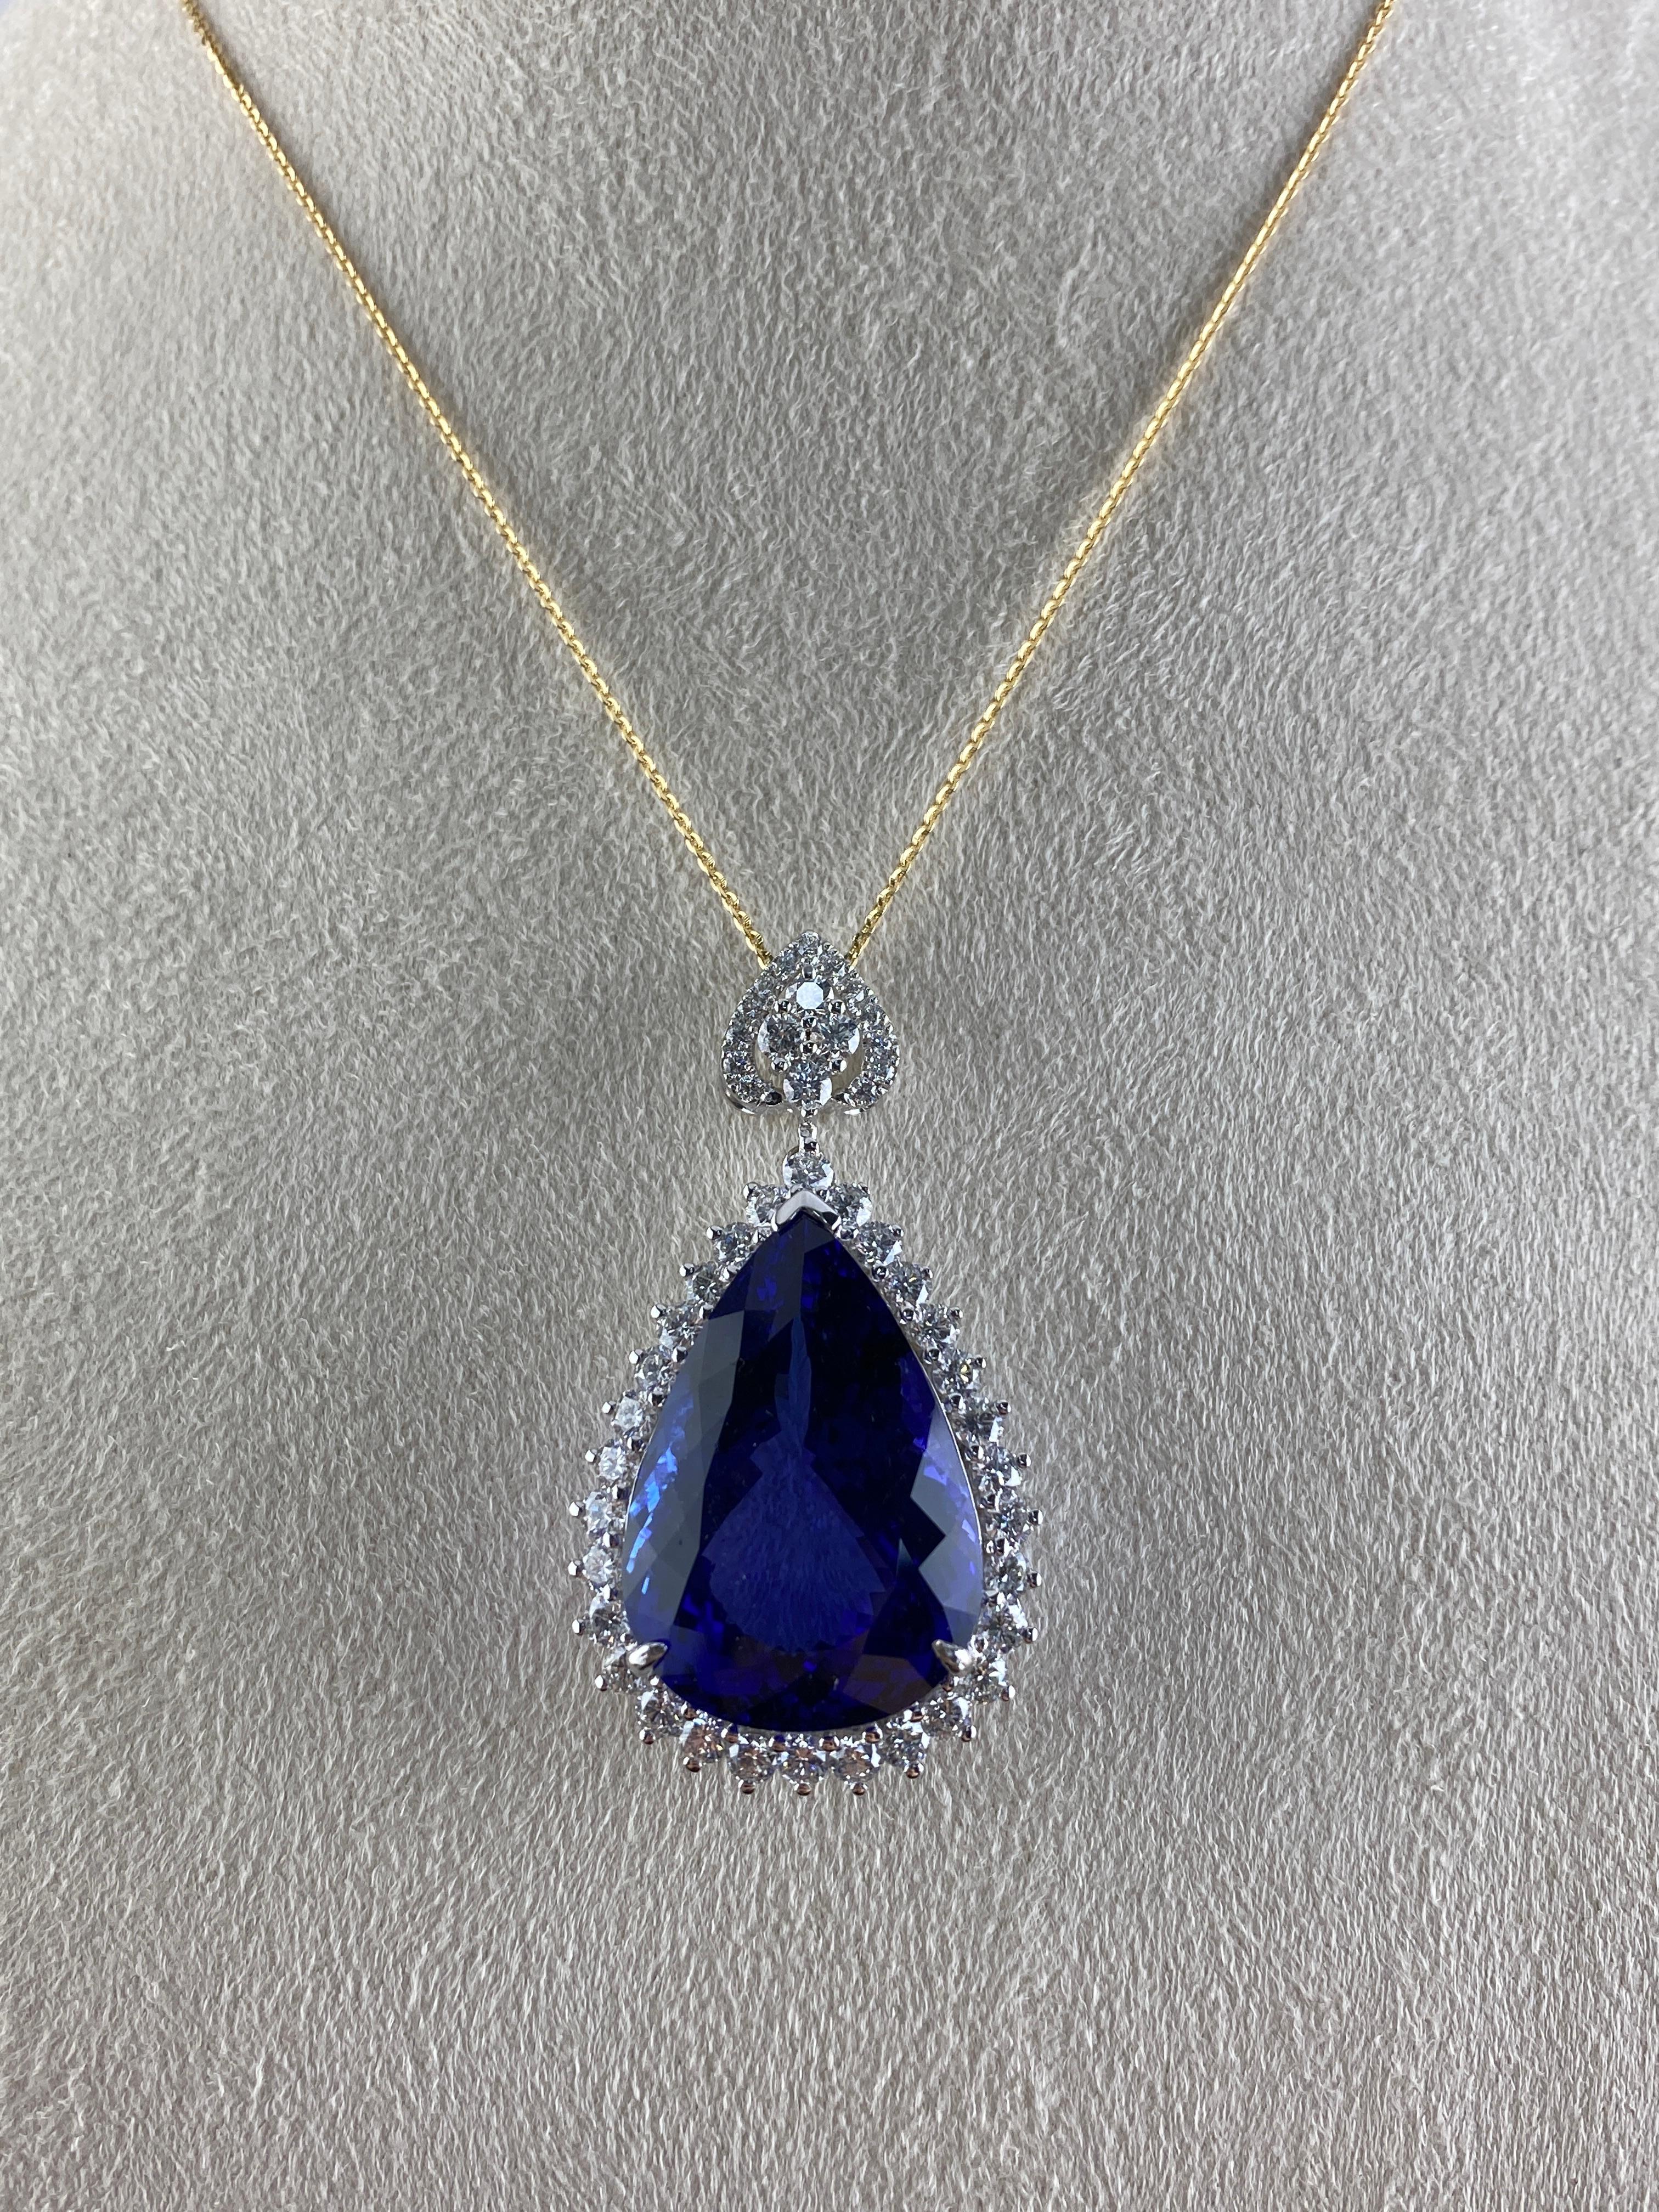 Natural 18K White Gold 44.7 Carat Tanzanite Pendent Necklace with Cert, Rare For Sale 2